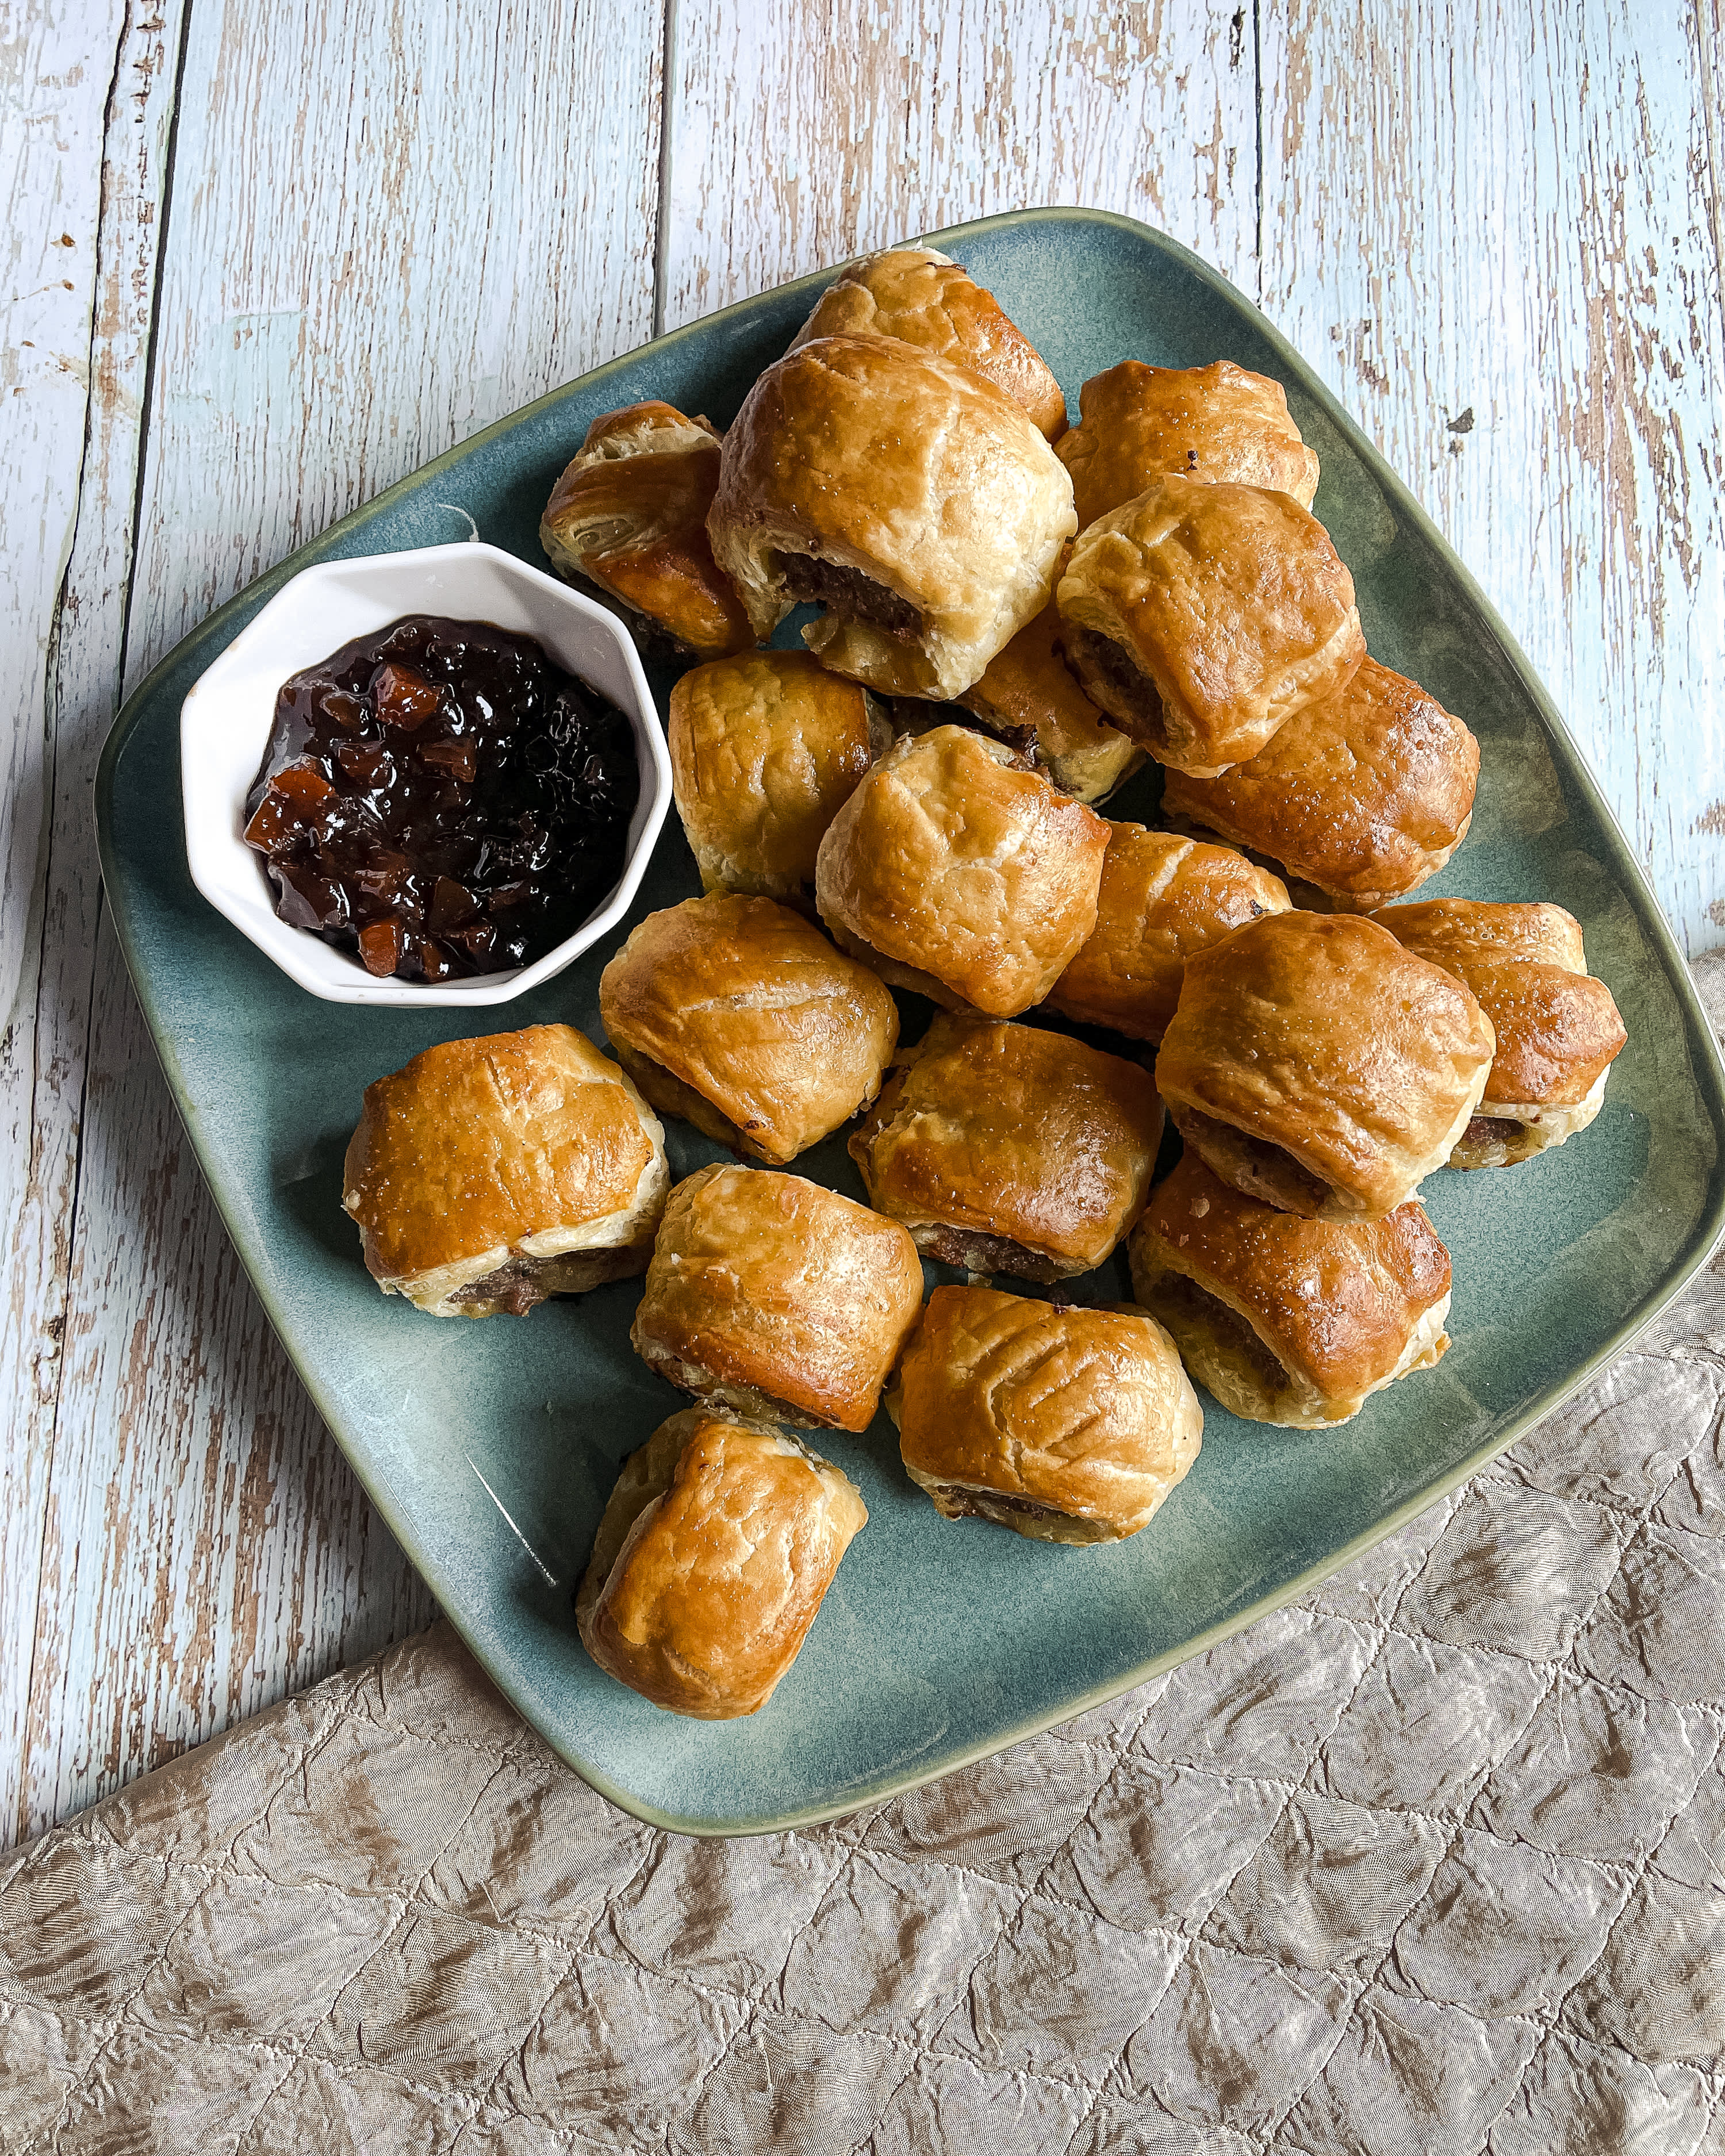 How To Make a Gregg's Sausage Roll  Gregg's Sausage Roll Recipe 